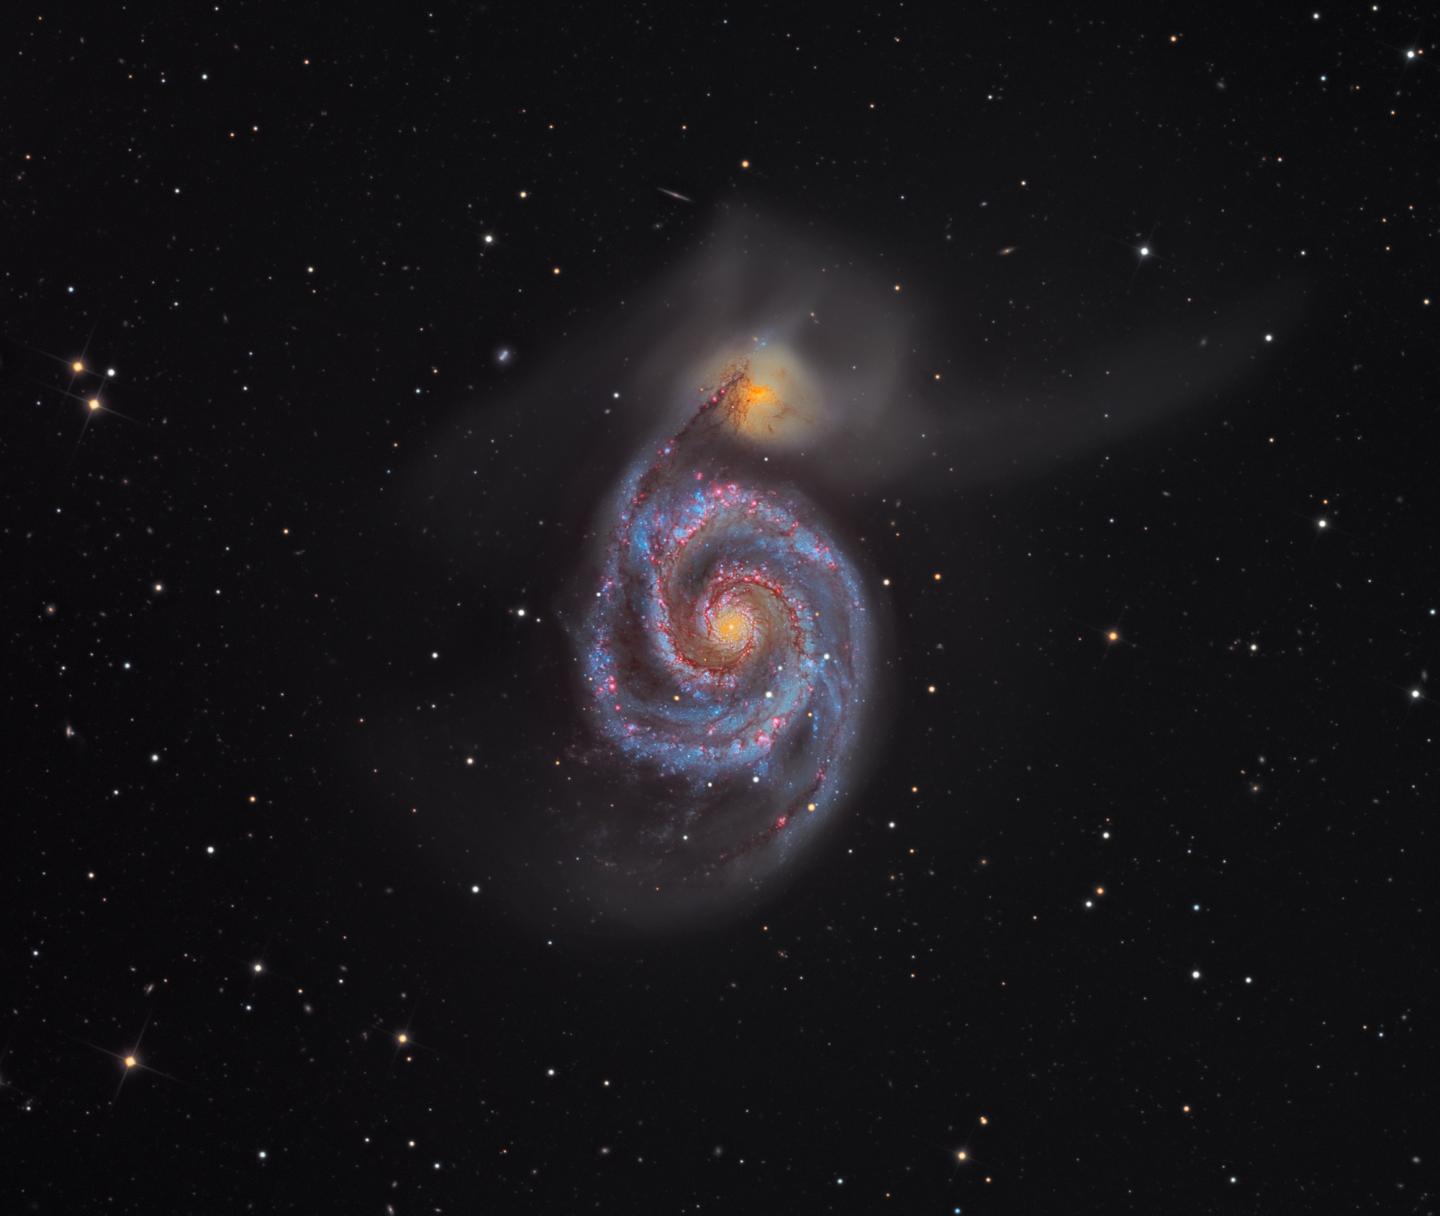 An astronomy photograph showing the M51 'Whirlpool Galaxy'. The galaxy appears as a purple-yellow spiral in the centre of the frame